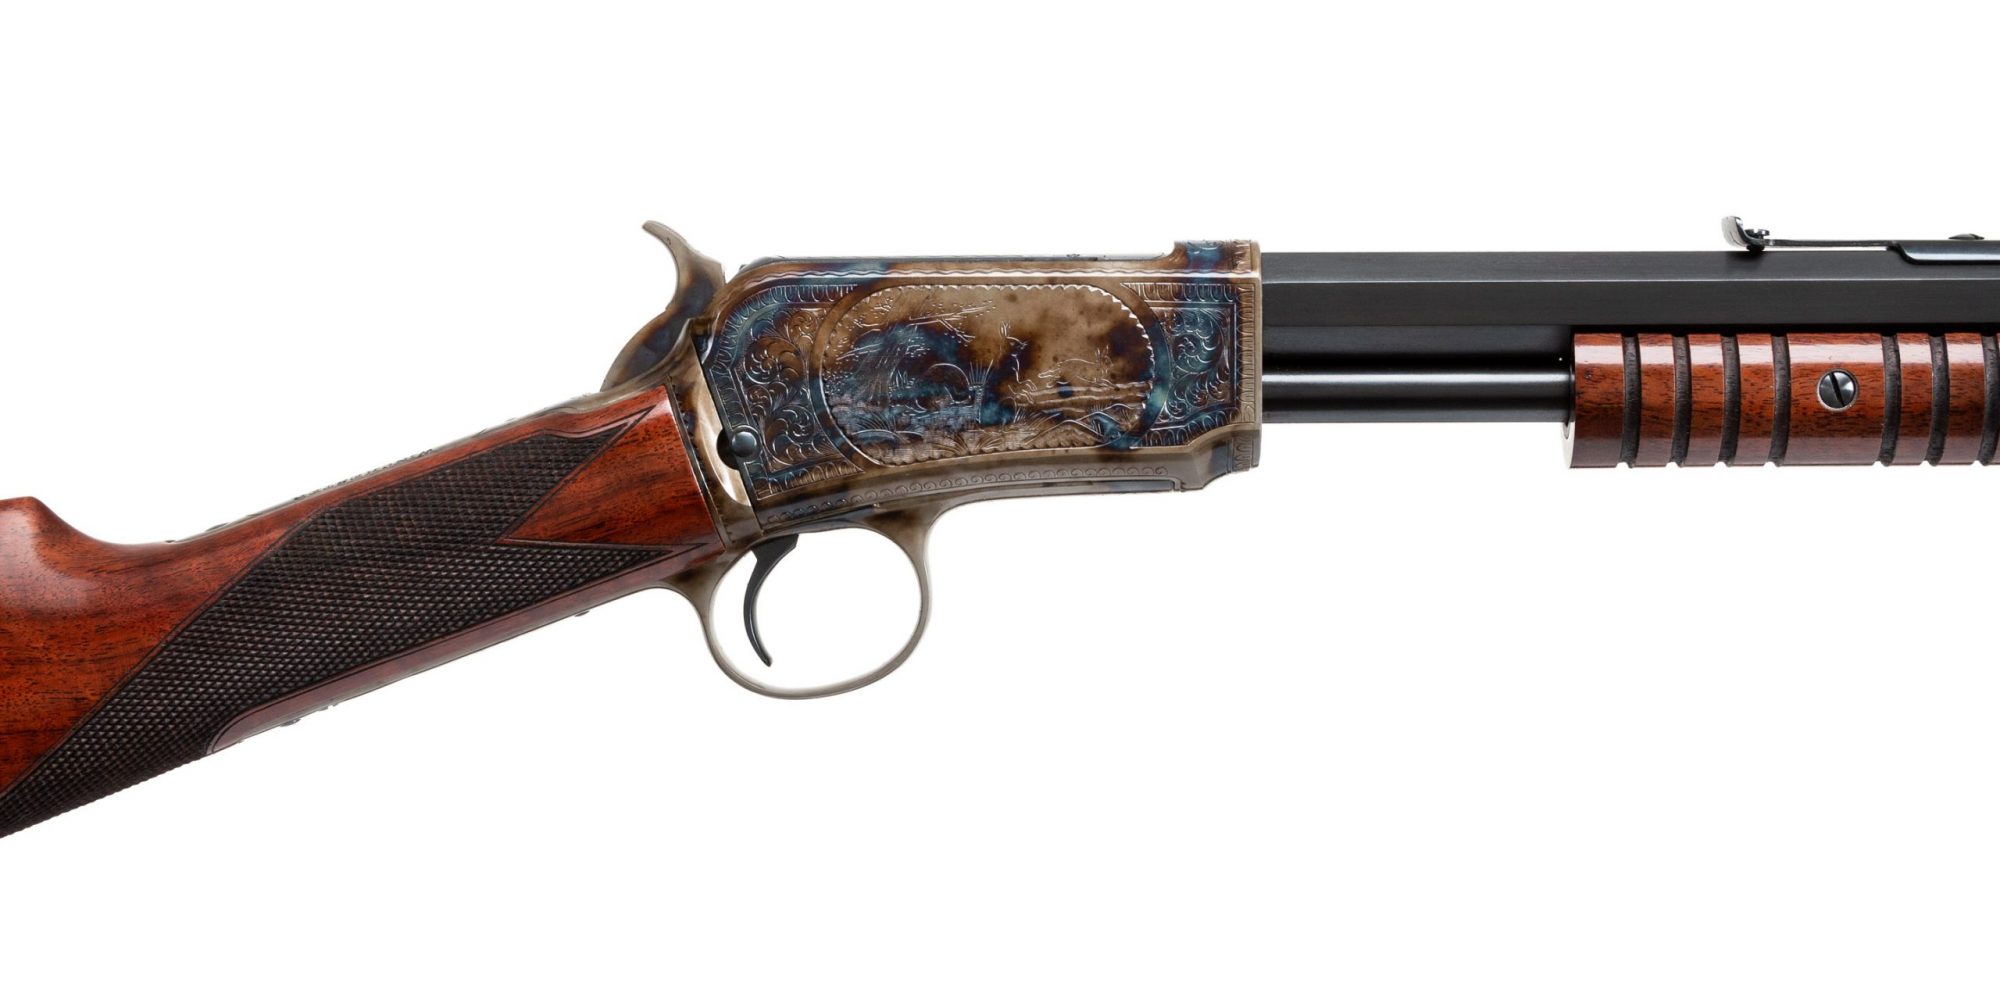 Photo of a restored engraved Winchester Model 1890 rifle by Turnbull Restoration of Bloomfield, NY